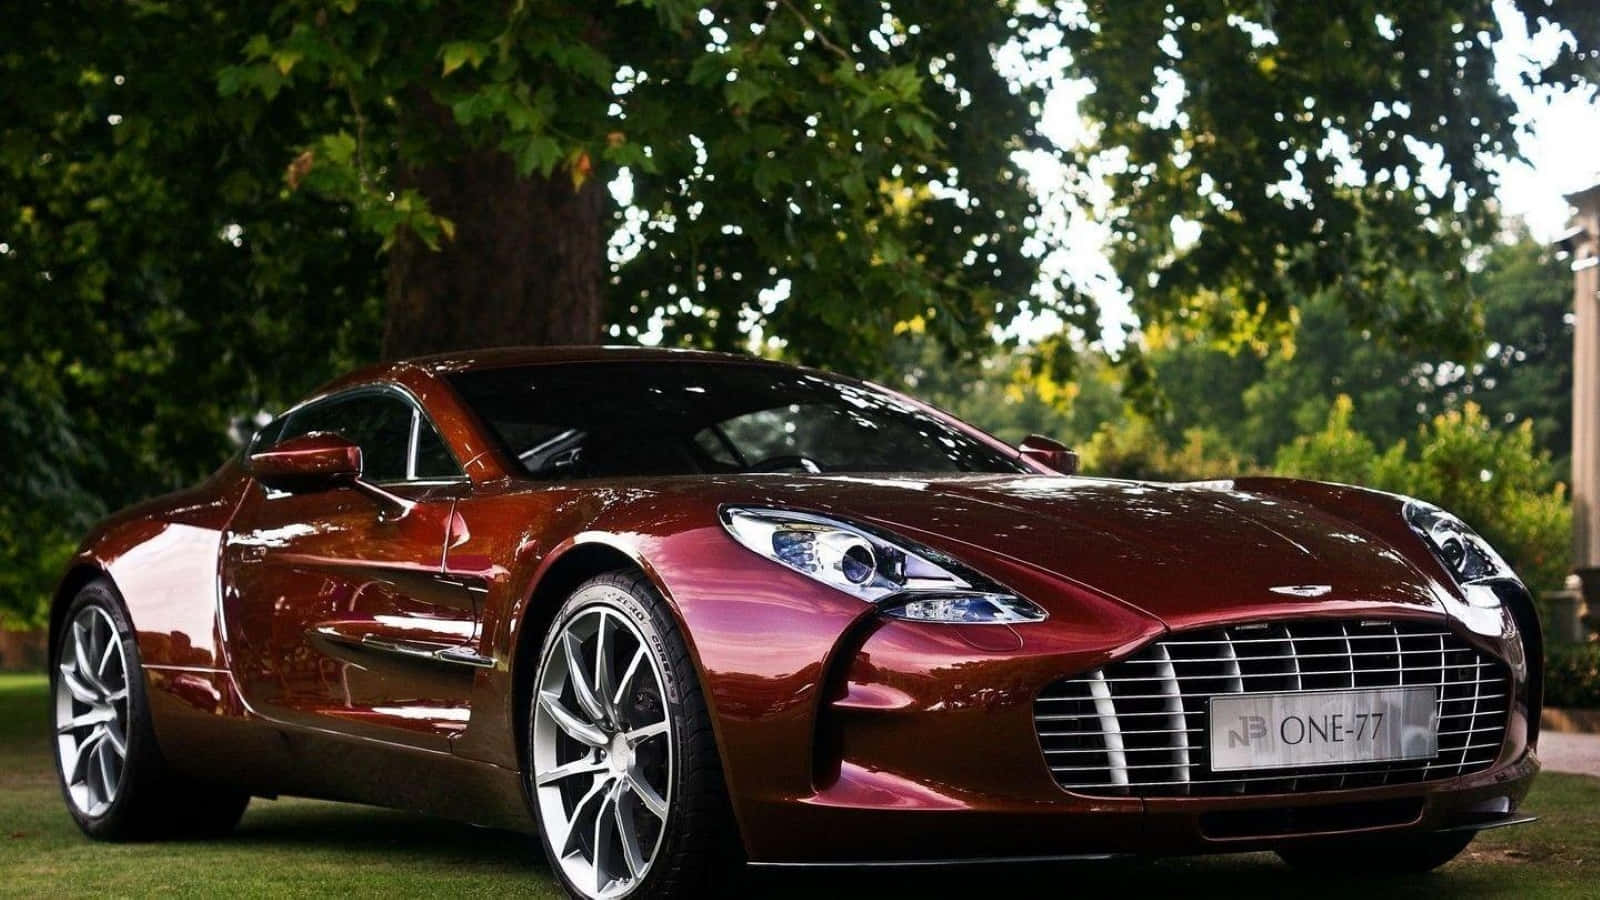 Aston Martin One-77: The Ultimate Luxury Supercar Wallpaper